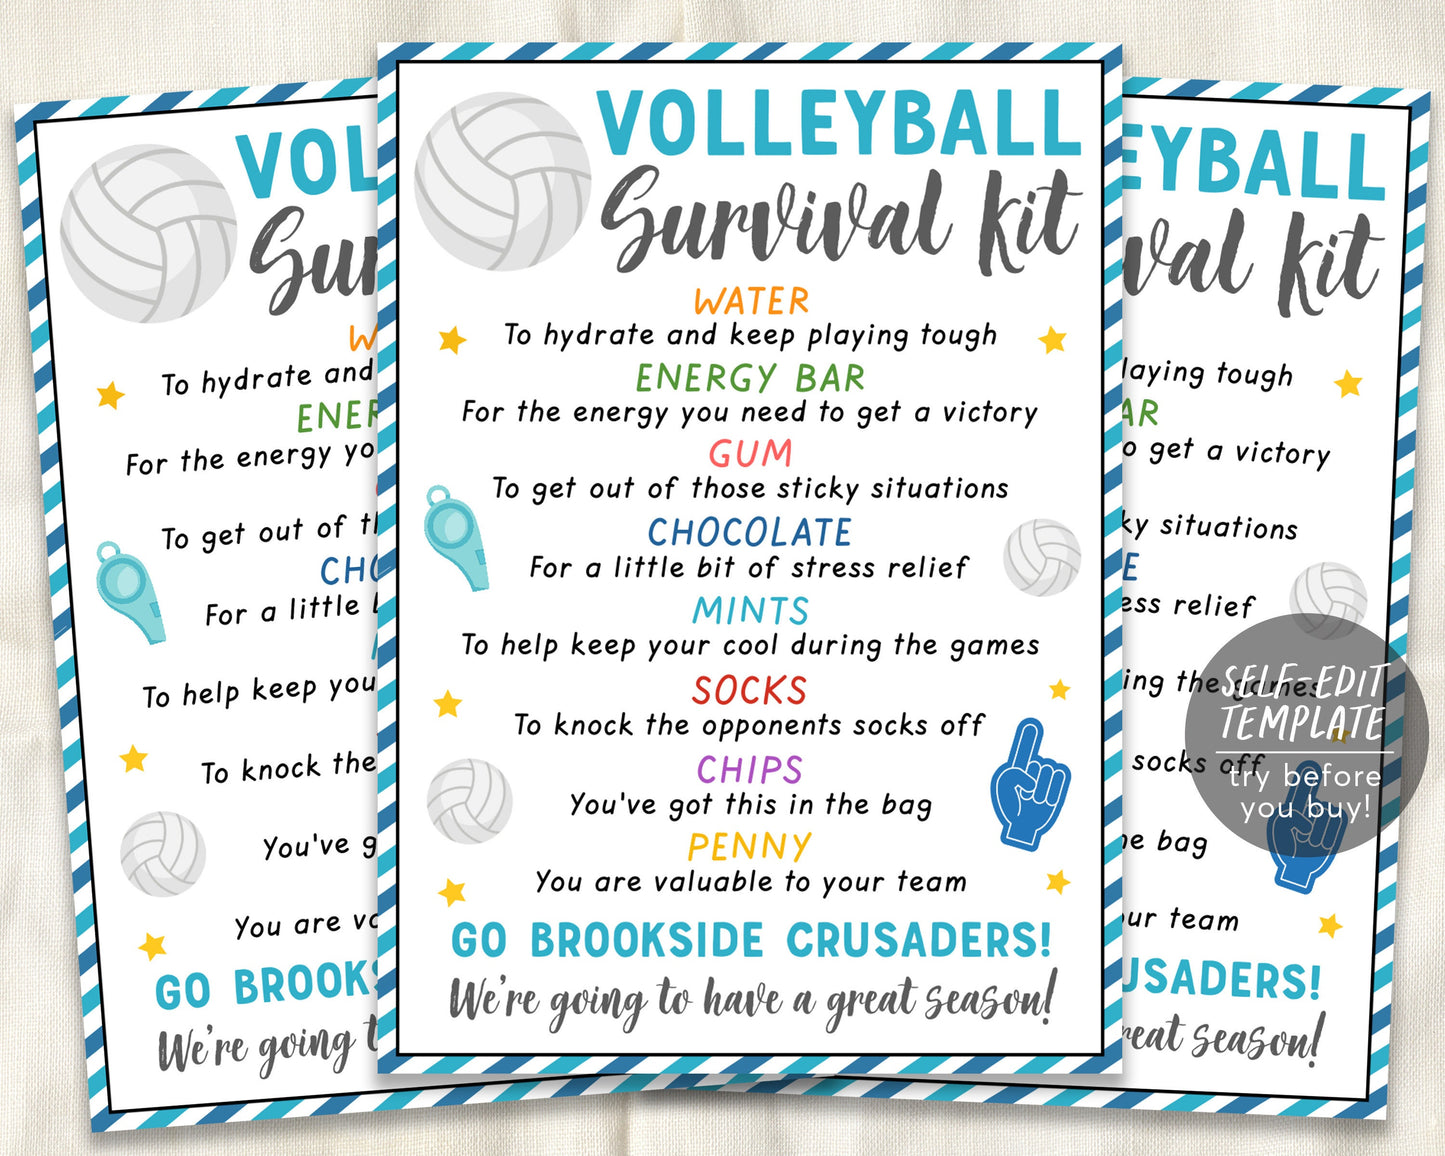 Volleyball Survival Kit Gift Tags Editable Template, Volleyball Player Team Gift Idea, Kids School Sports Snack Treat Tags Team Appreciation